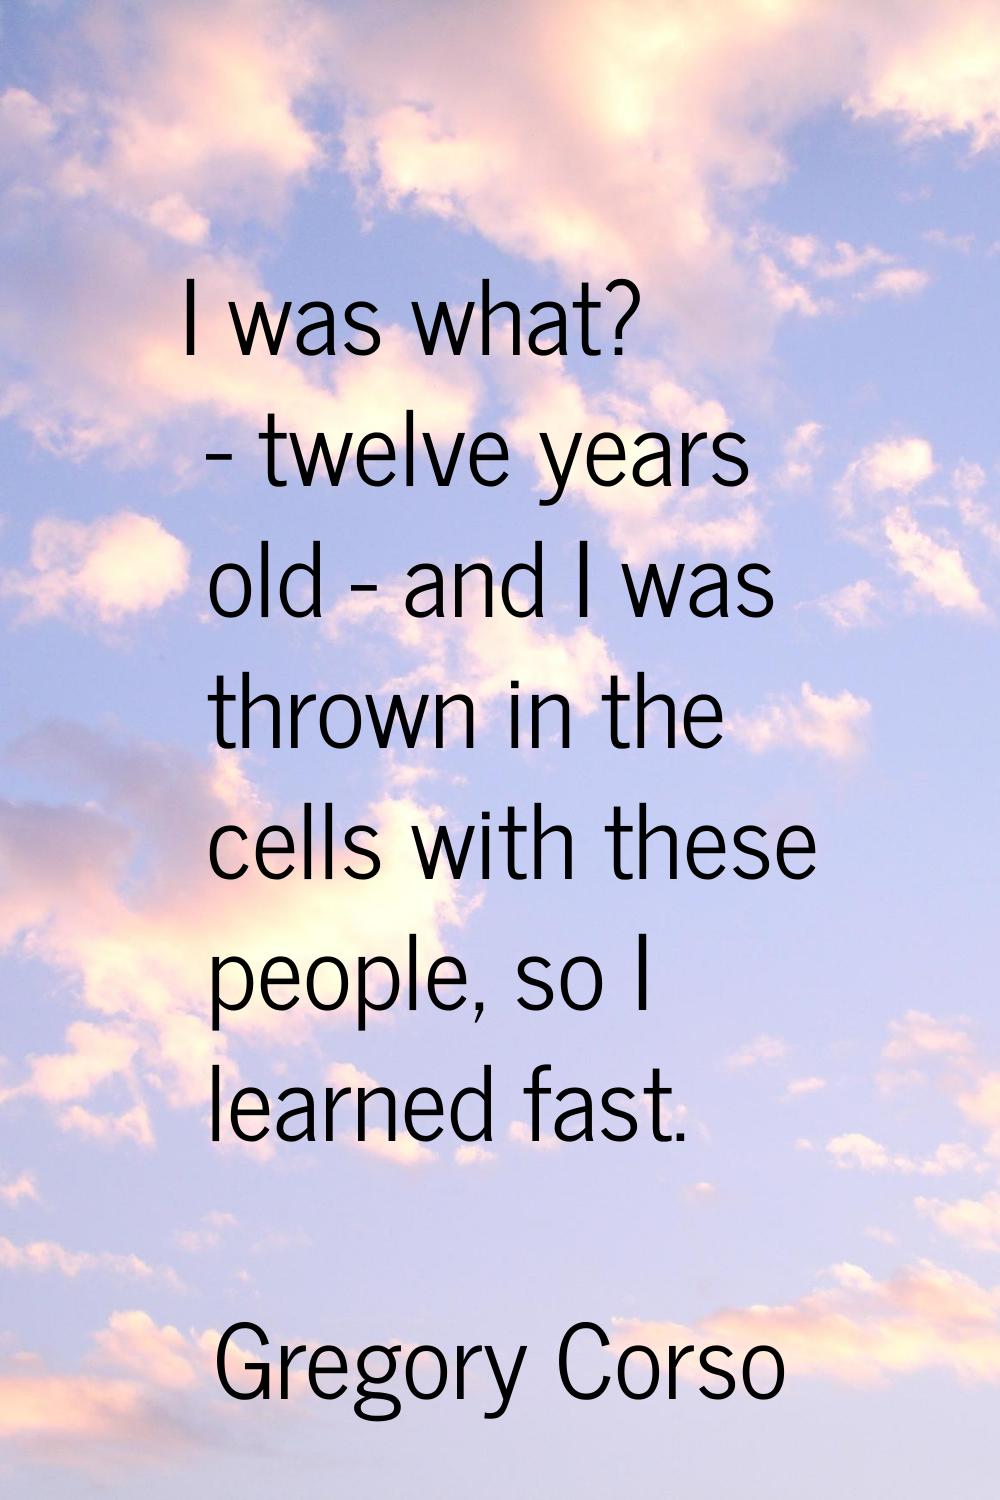 I was what? - twelve years old - and I was thrown in the cells with these people, so I learned fast